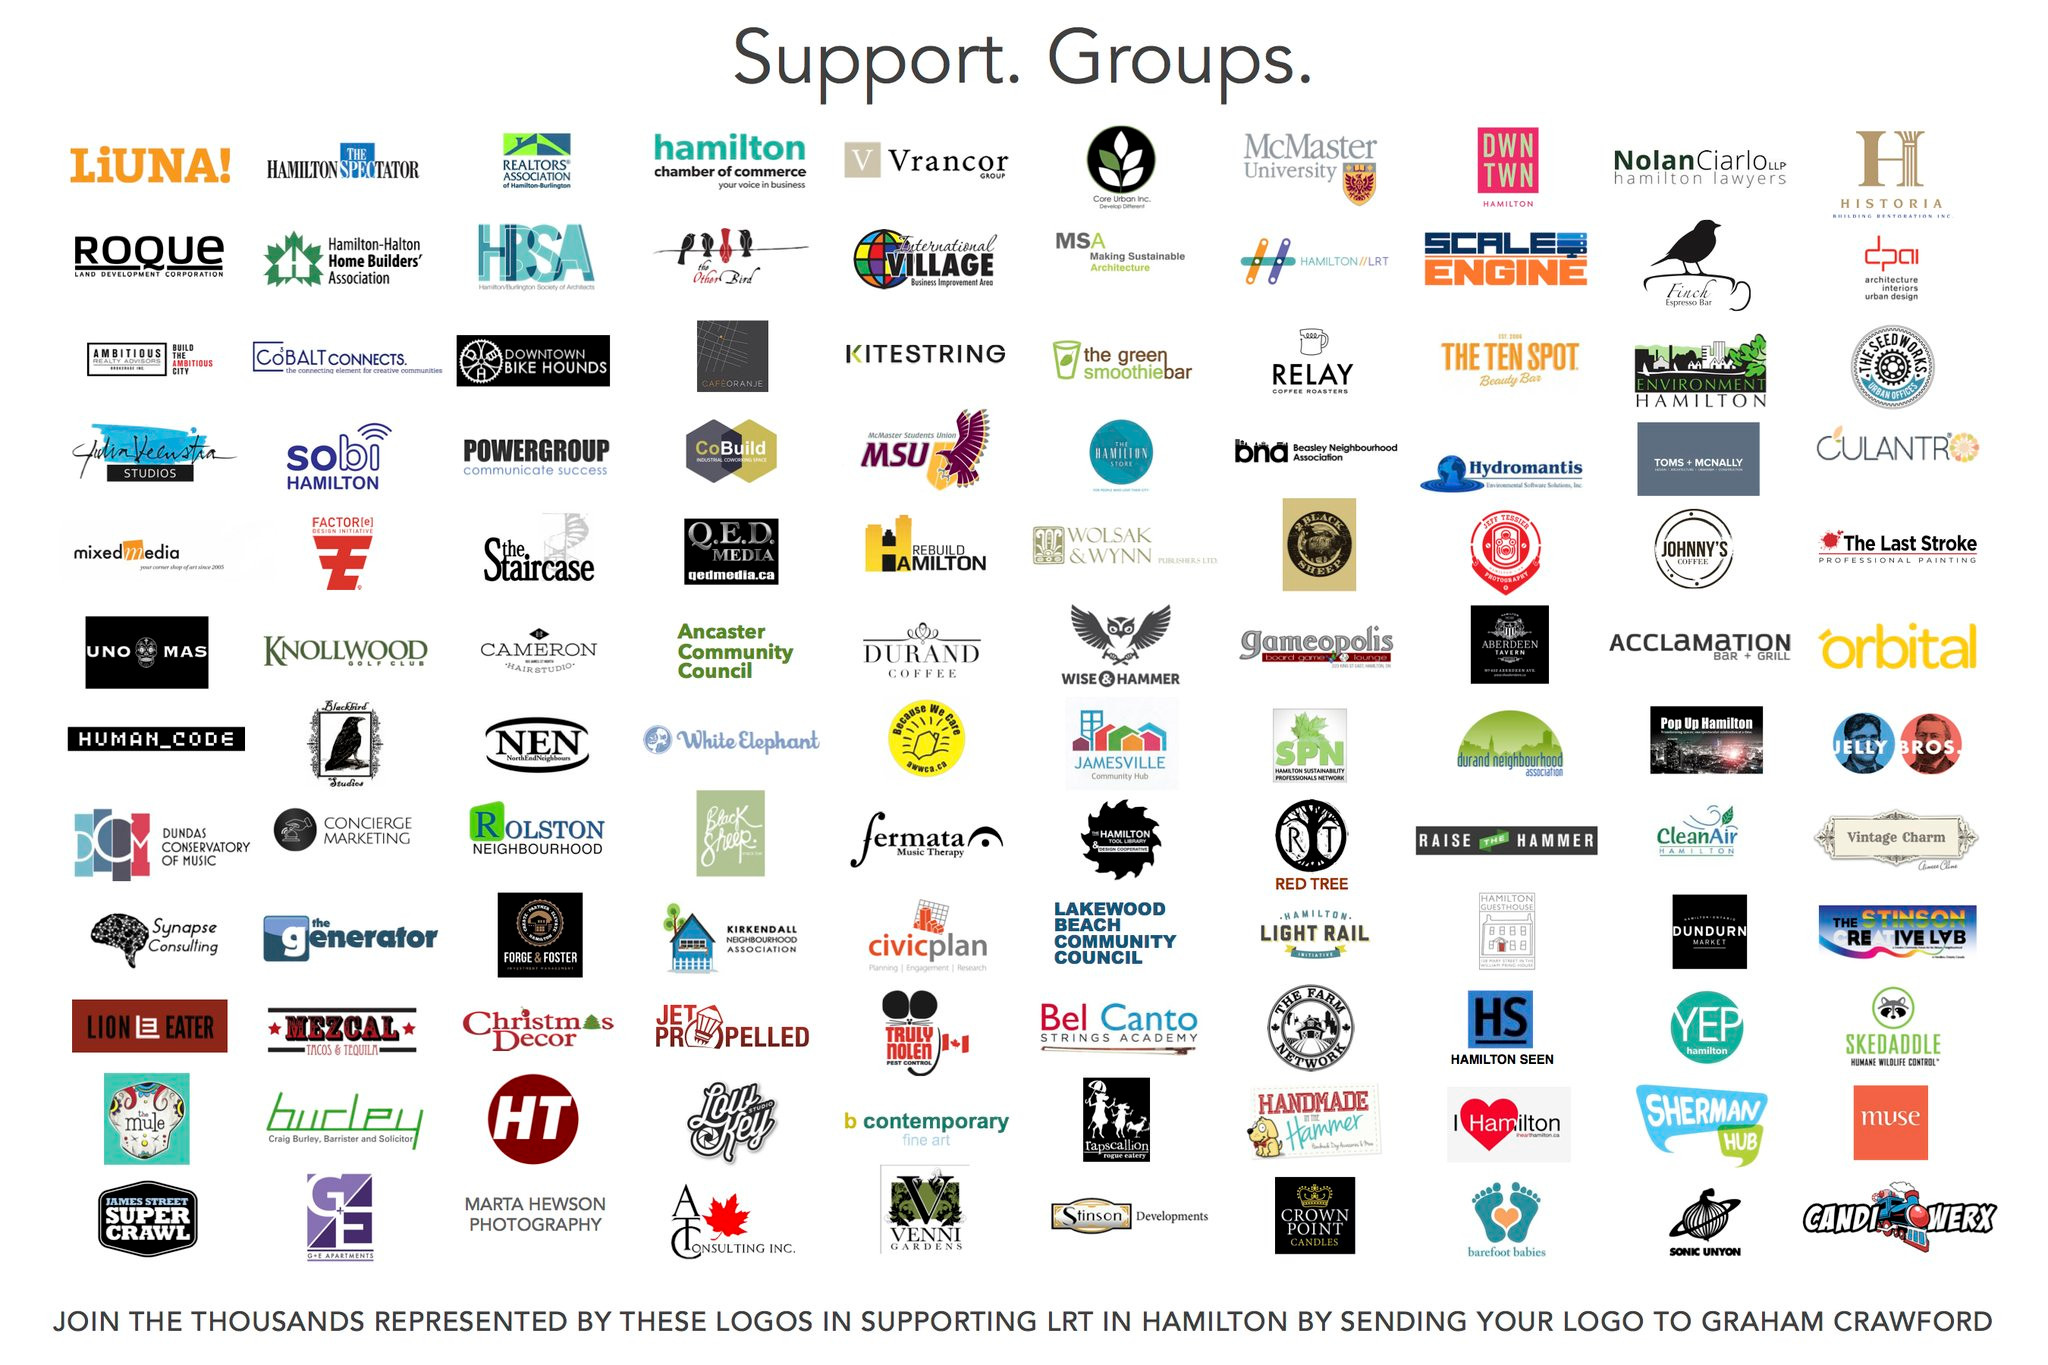 LRT Support Groups, up to 120 organizations now